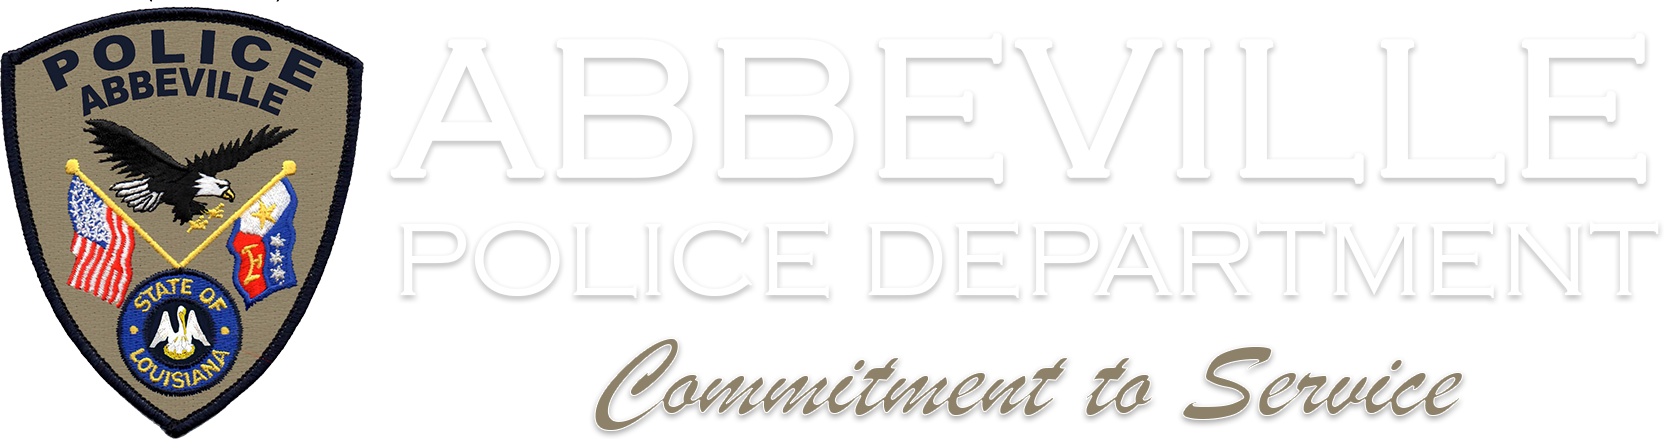 Abbeville Police Department